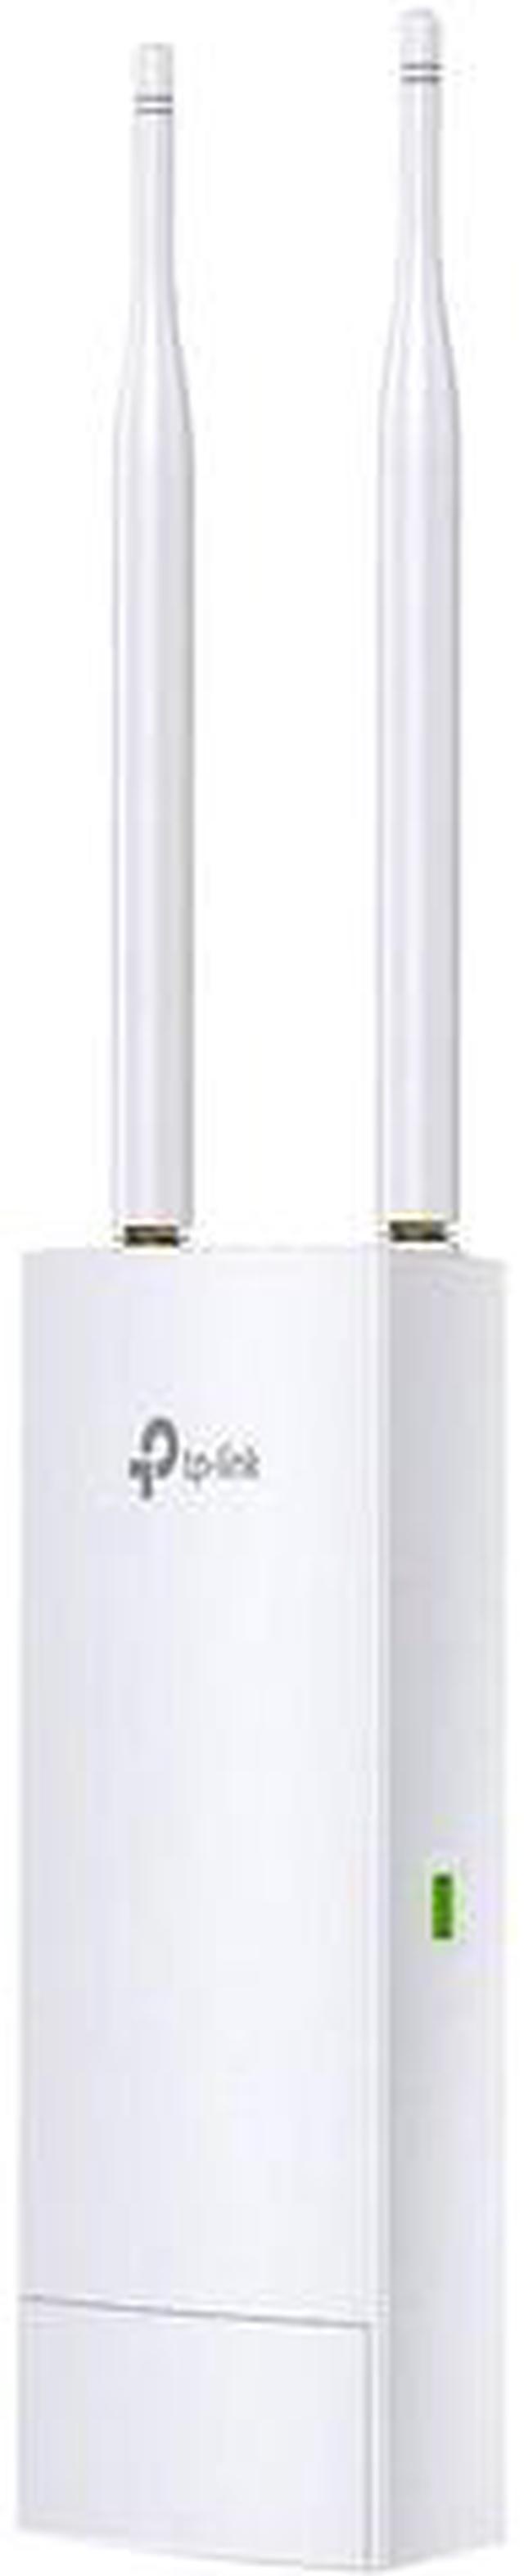 TP-Link EAP110 N300 Wireless Point N Outdoor Access